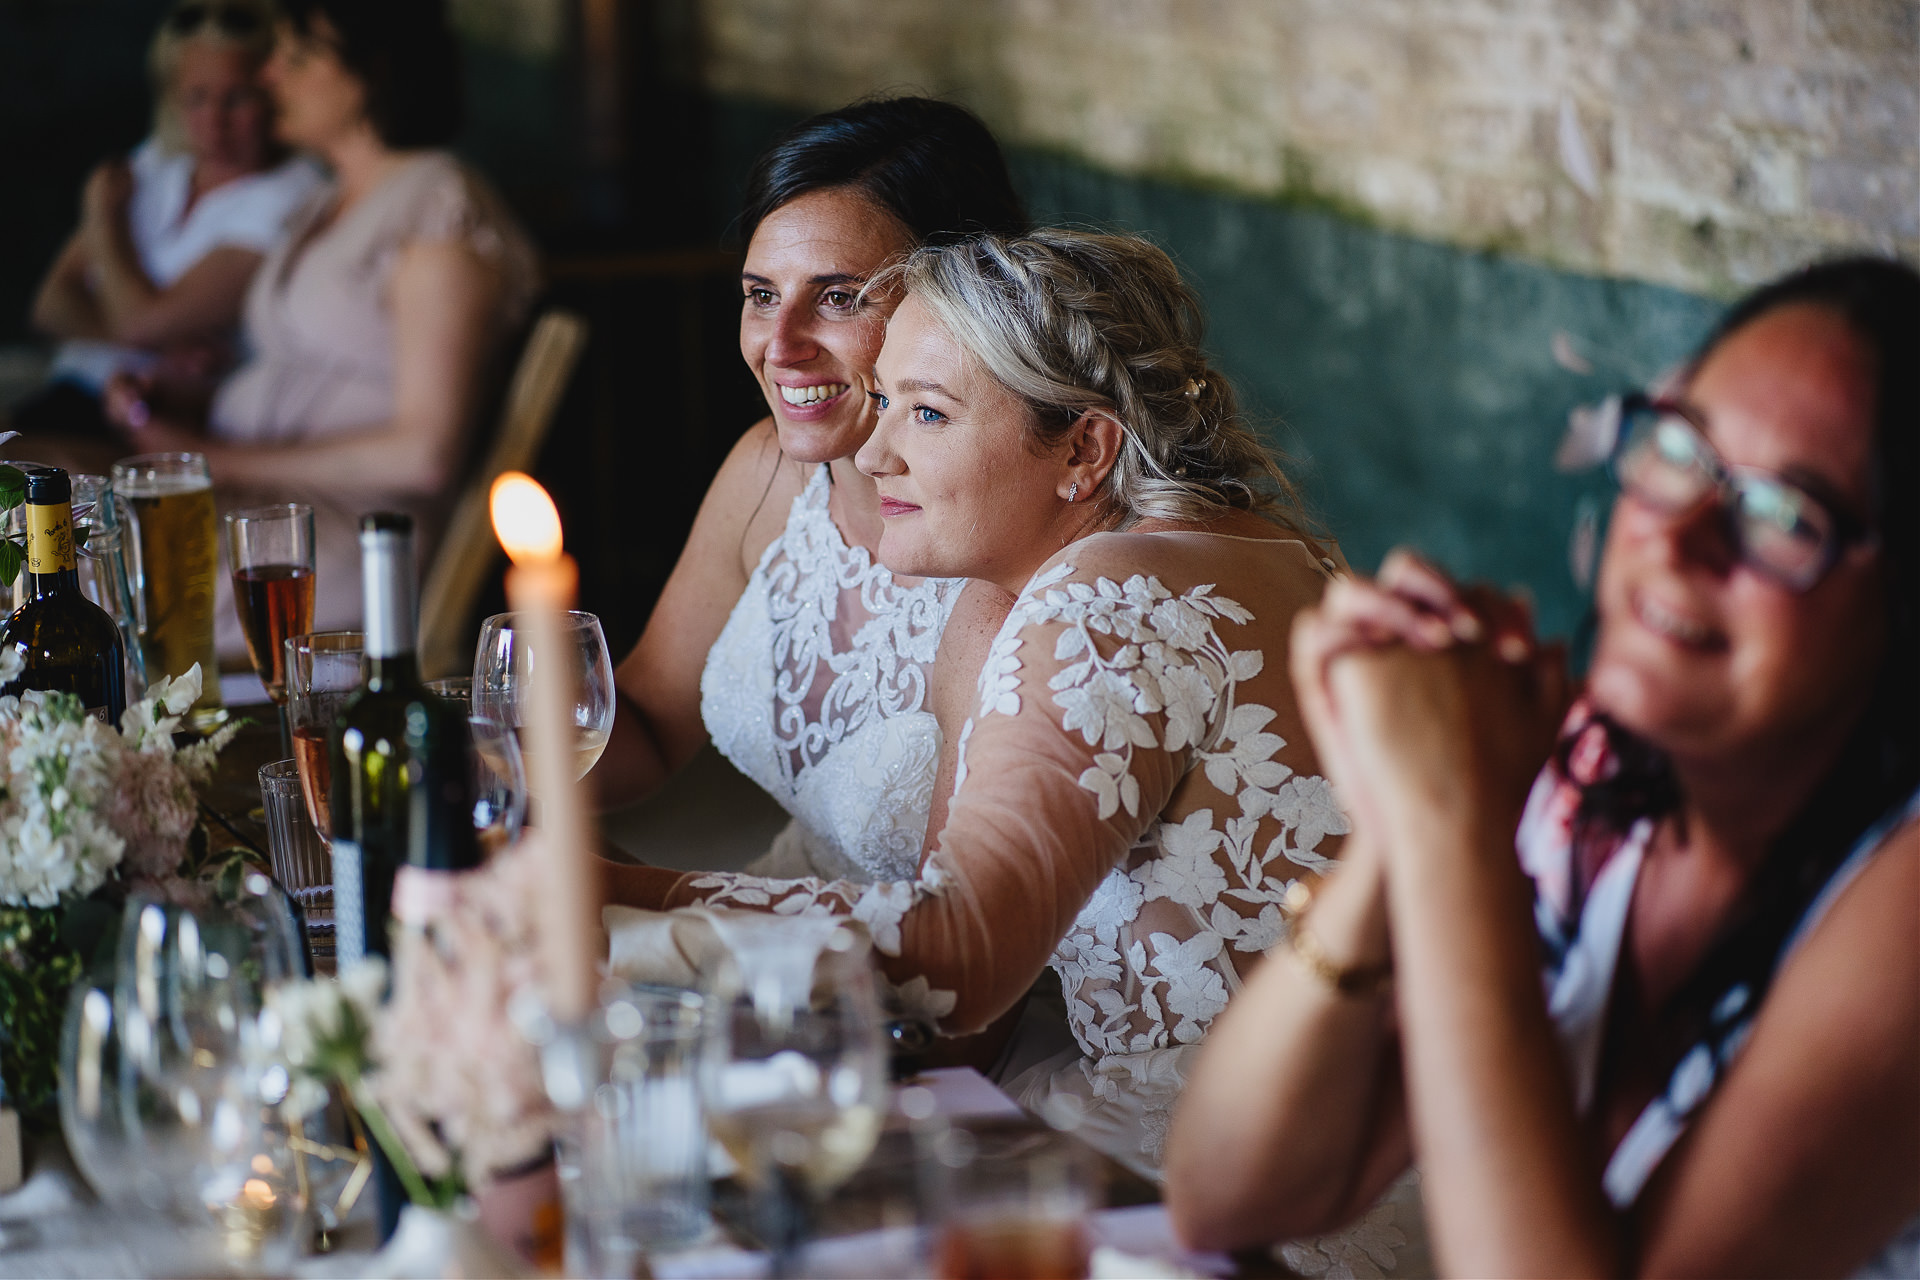 Two brides listening to wedding speeches and smiling together